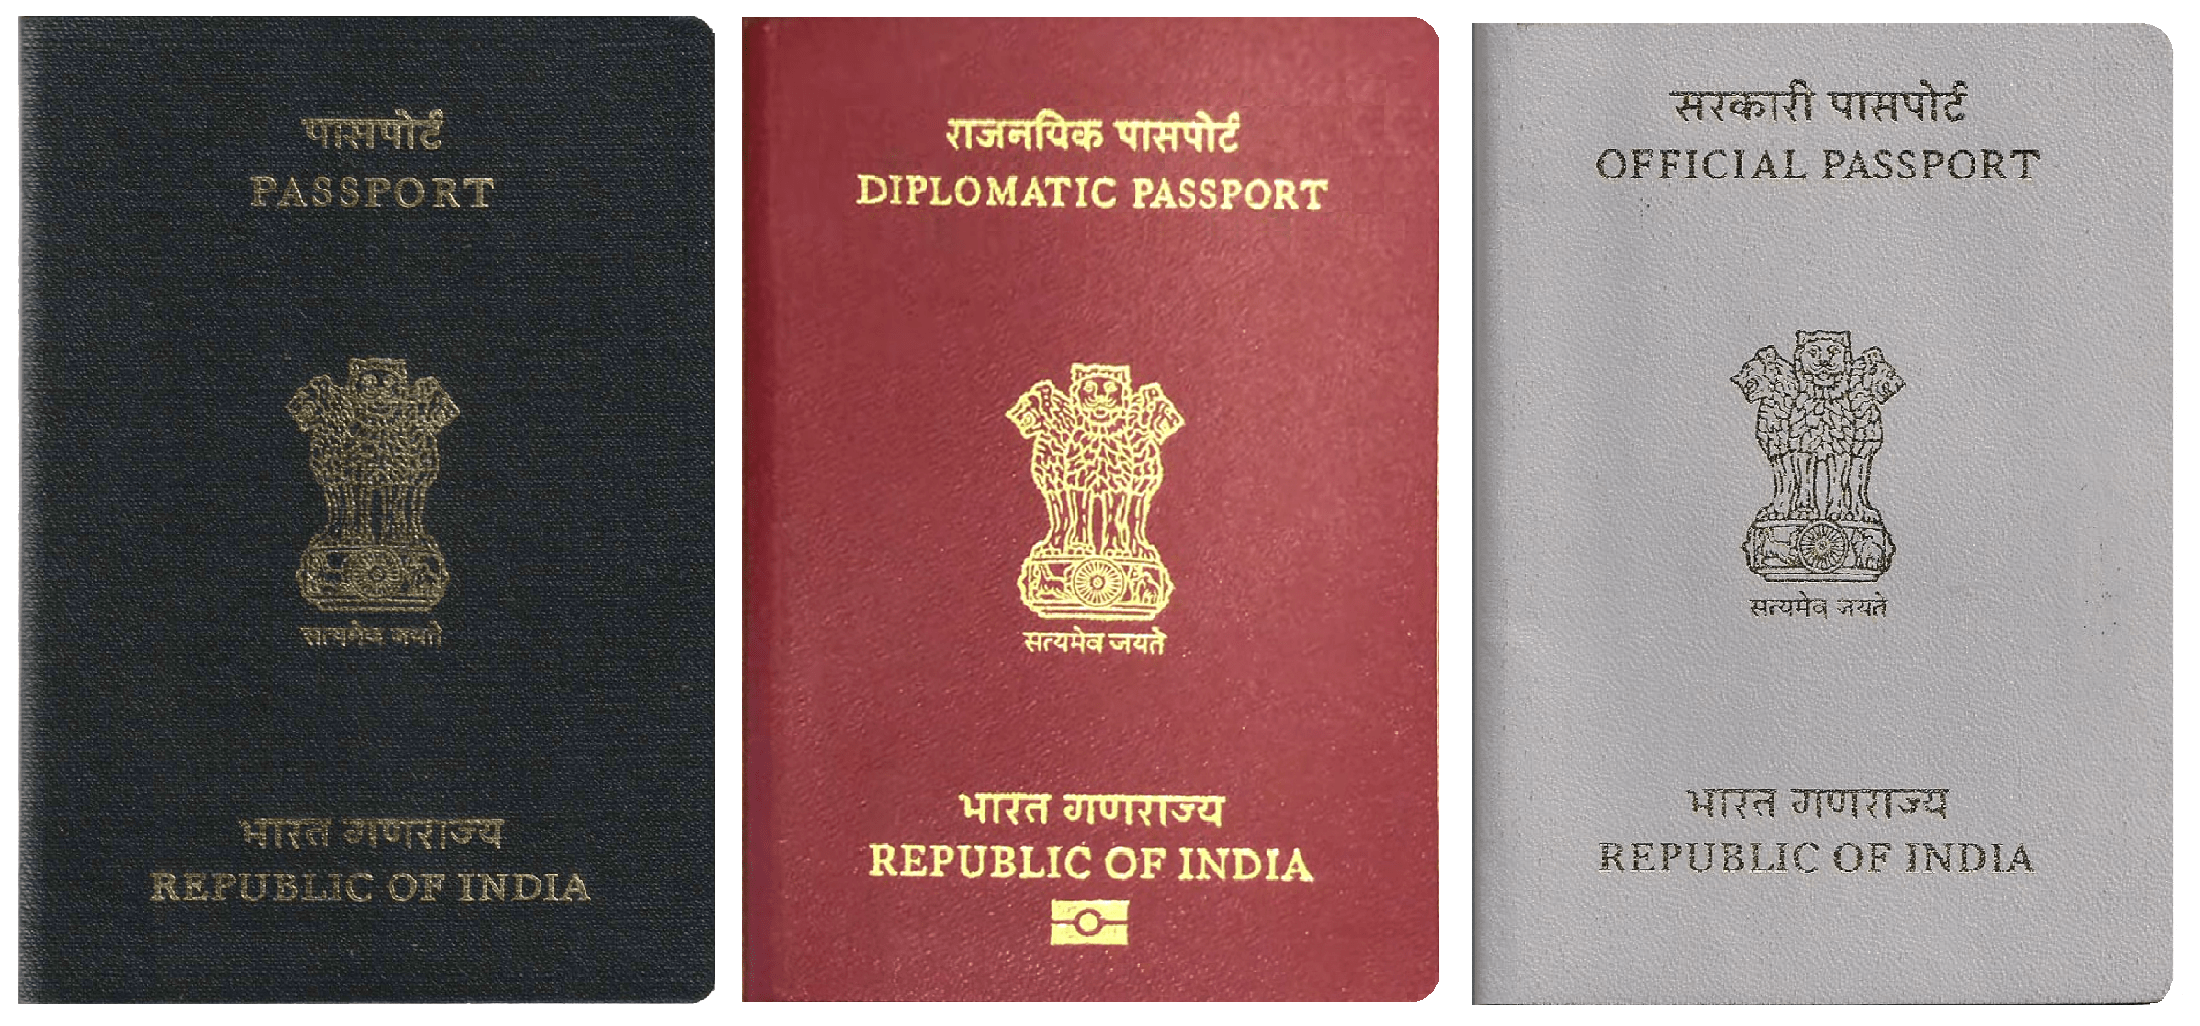 Learn about the e-passport, which was announced in the budget